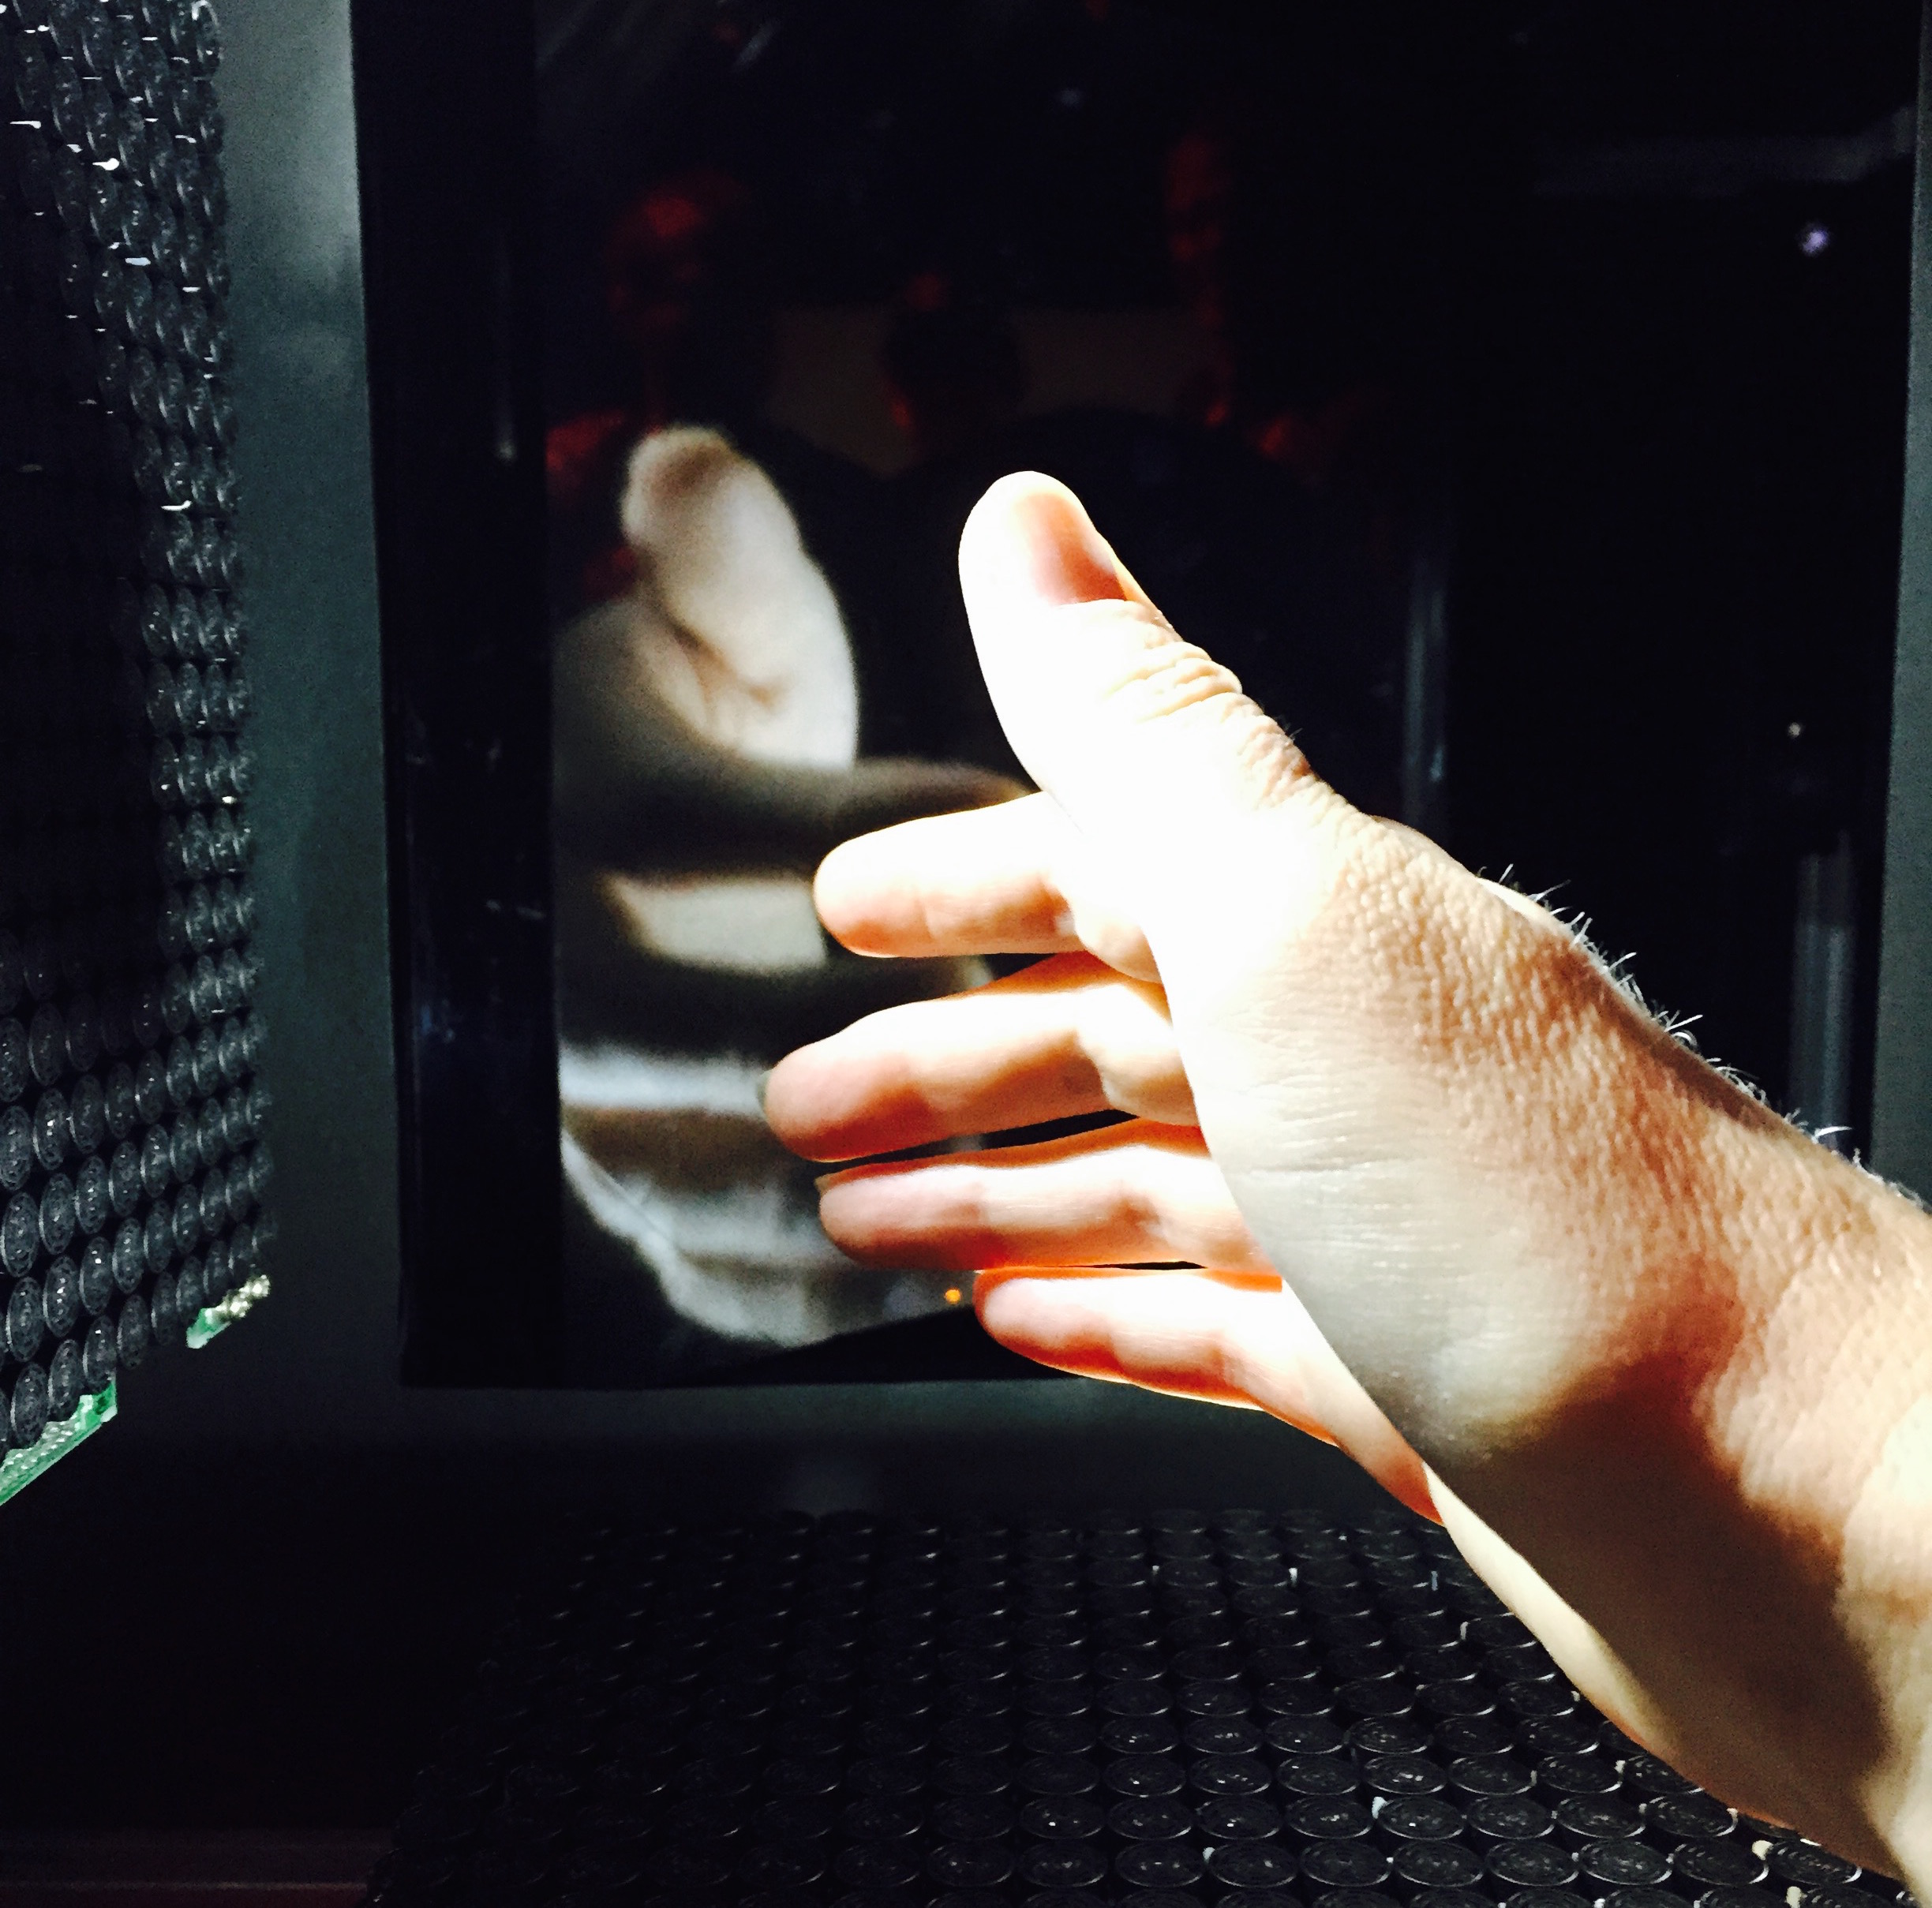 The Haptic Tech That Could Let You Touch The Person You’re Skyping With